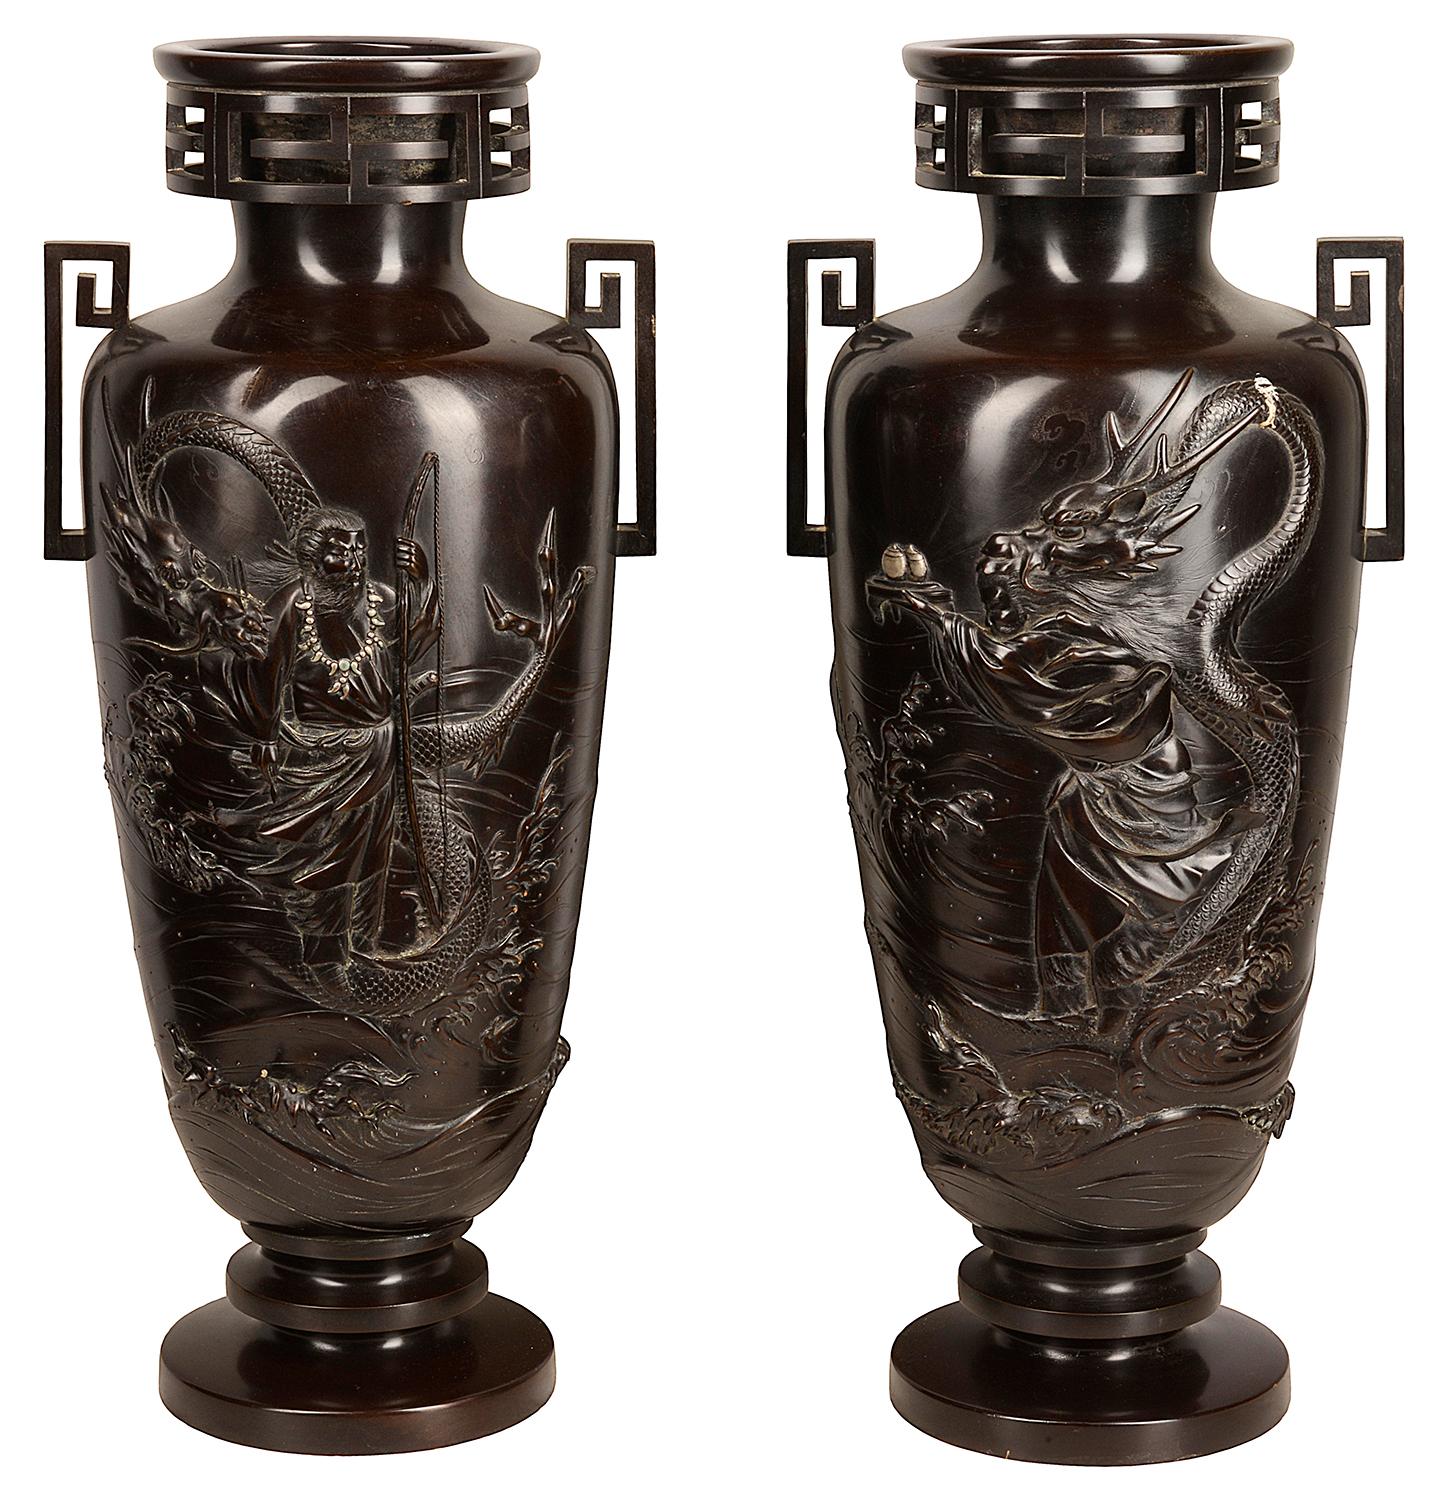 A pair of Japanese cast bronze vases, each of slender tapered form resting on a stepped base and rising to a narrow neck with everted, key-fret rim, applied to the shoulder with rinzu handles, each decorated with a mythical figure, one offering a